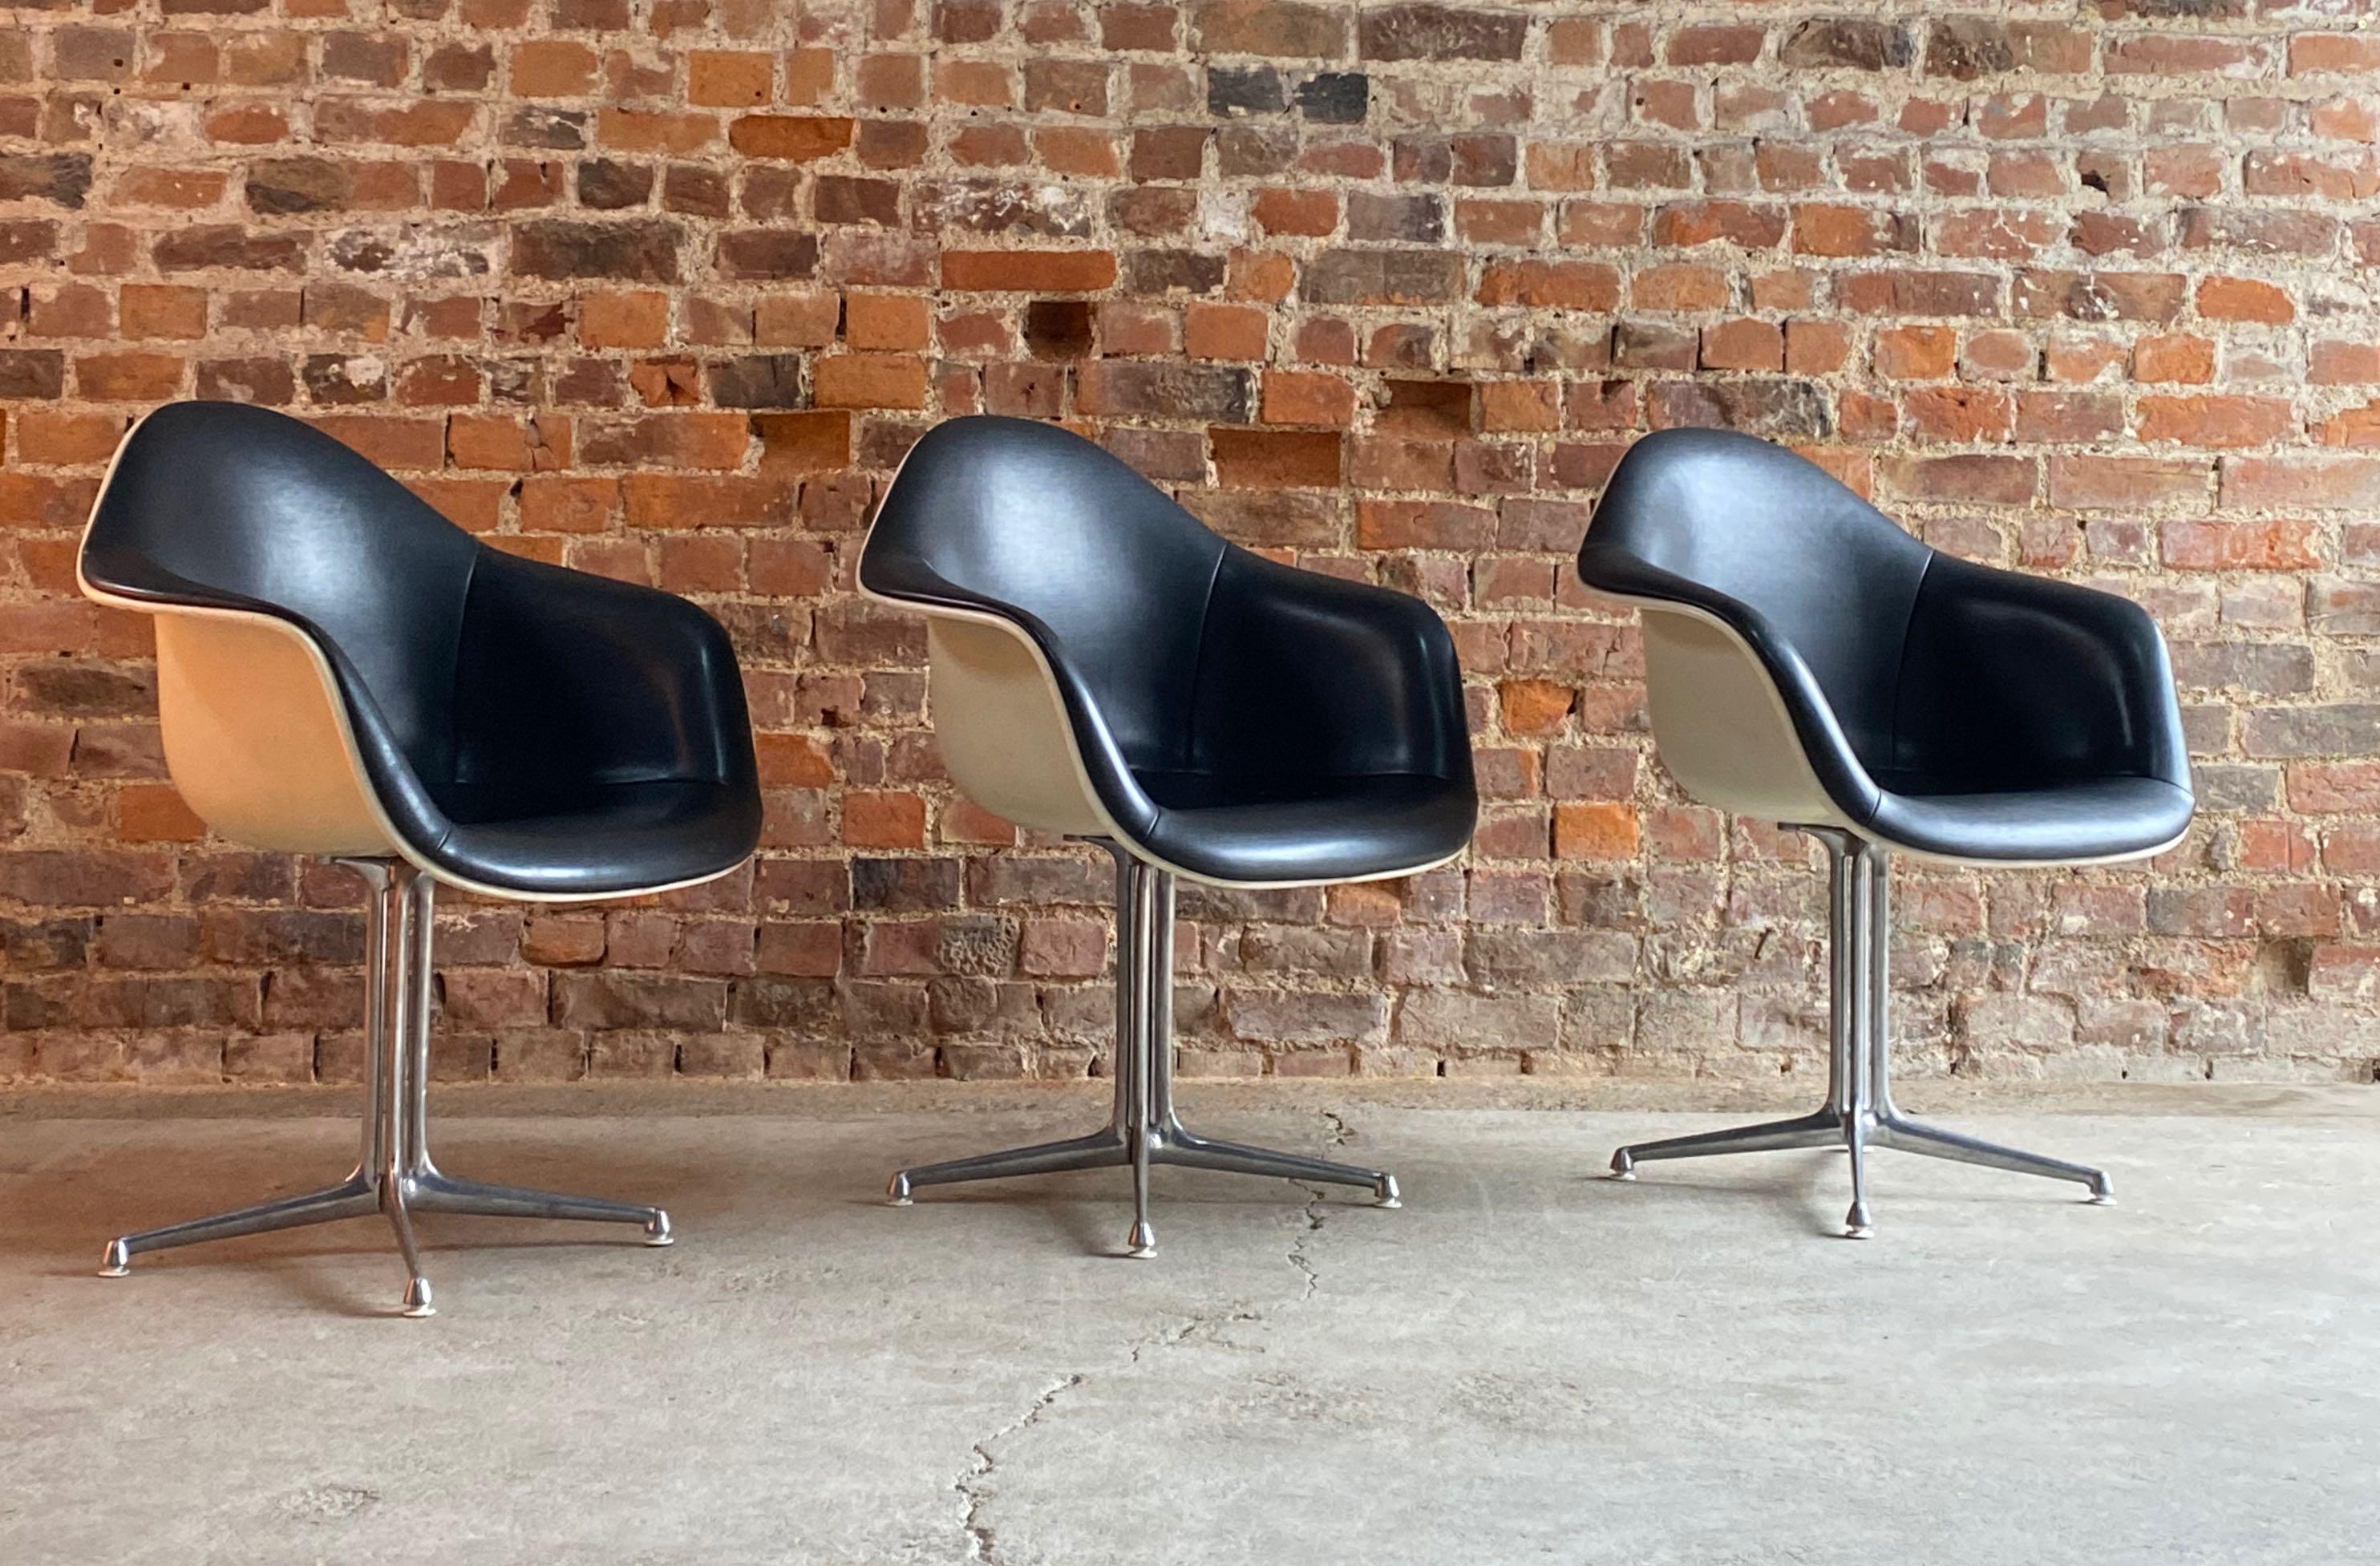 Charles and Ray Eames for Herman Miller Three 'La Fonda' chairs, circa 1960s

We are delighted to offer this fabulous set of three original Charles and Ray Eames for Herman Miller 'La Fonda' Chairs circa 1960s, the moulded shell shaped seats with